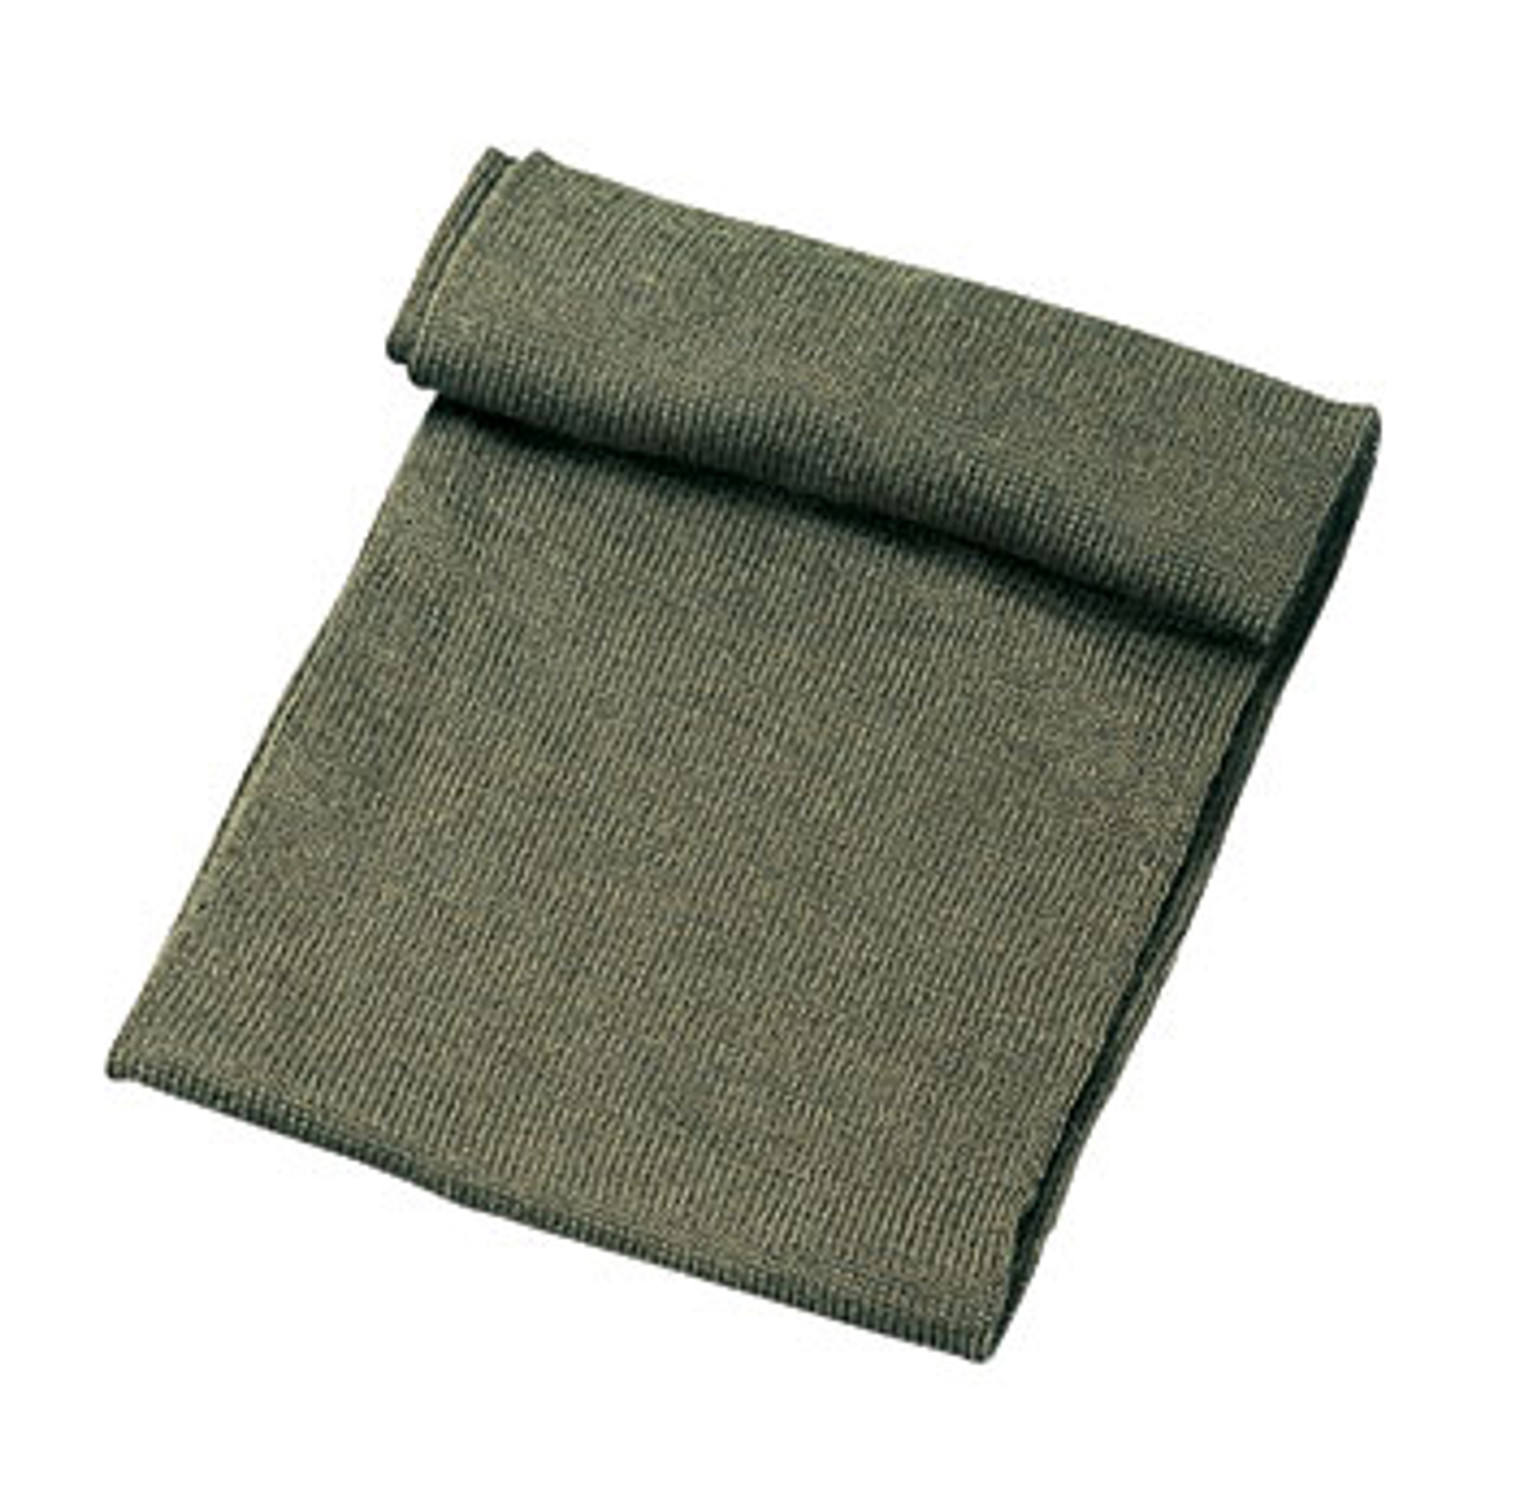 U.S. Armed Forces Wool Scarf - Olive Drab